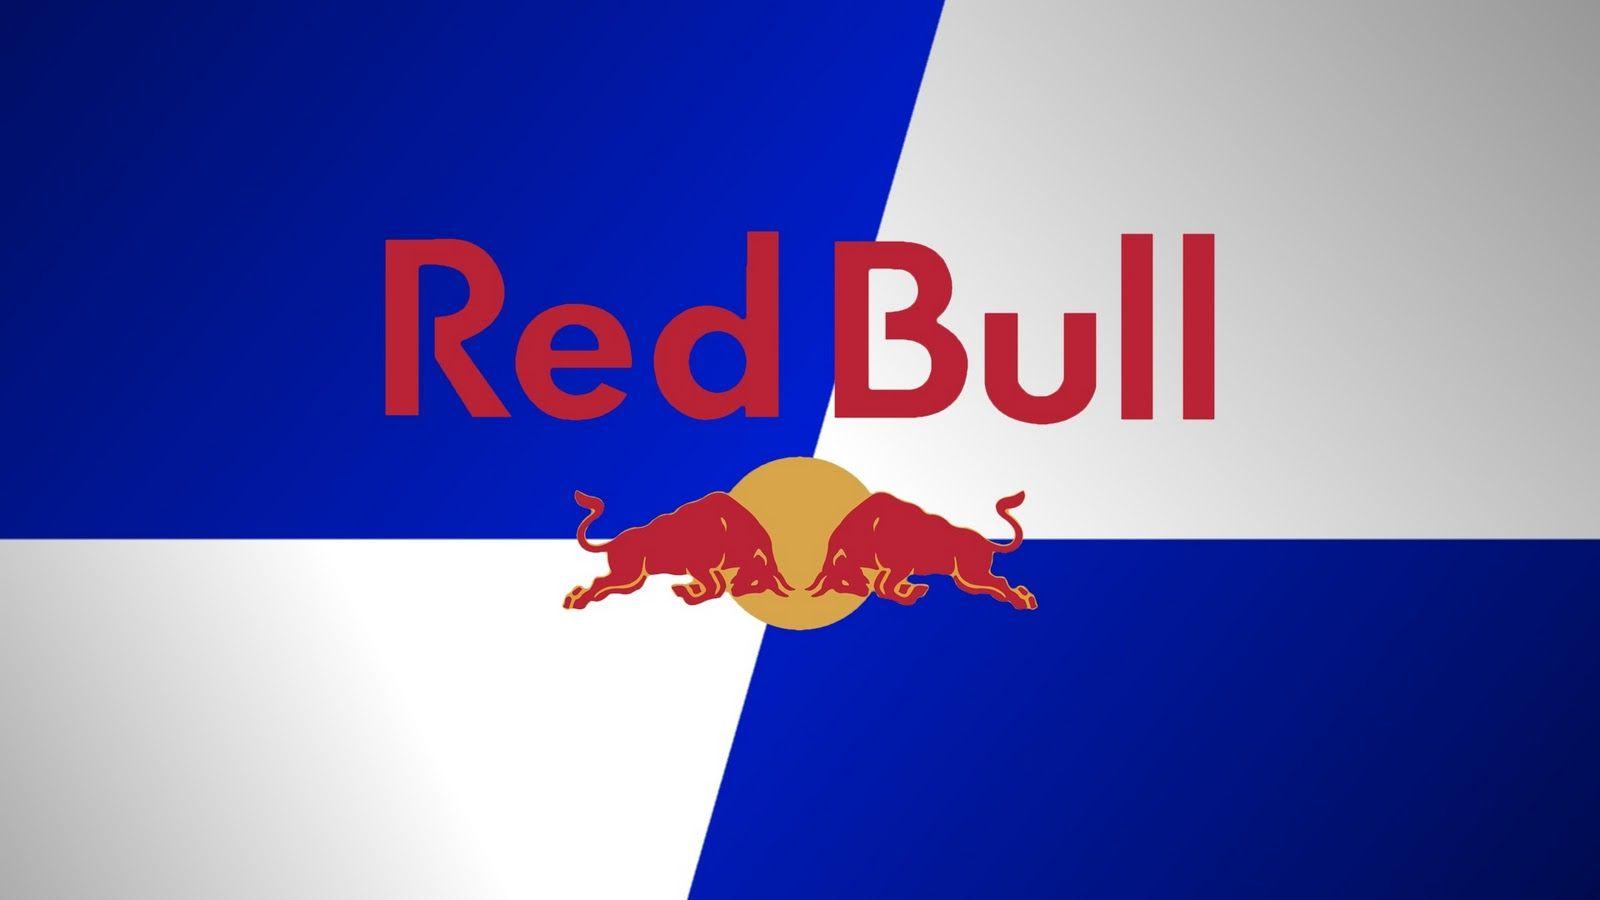 Red Bull Energy Drink Logo - The Red Bull Brand is More Than Just an Energy Drink it is a Media ...